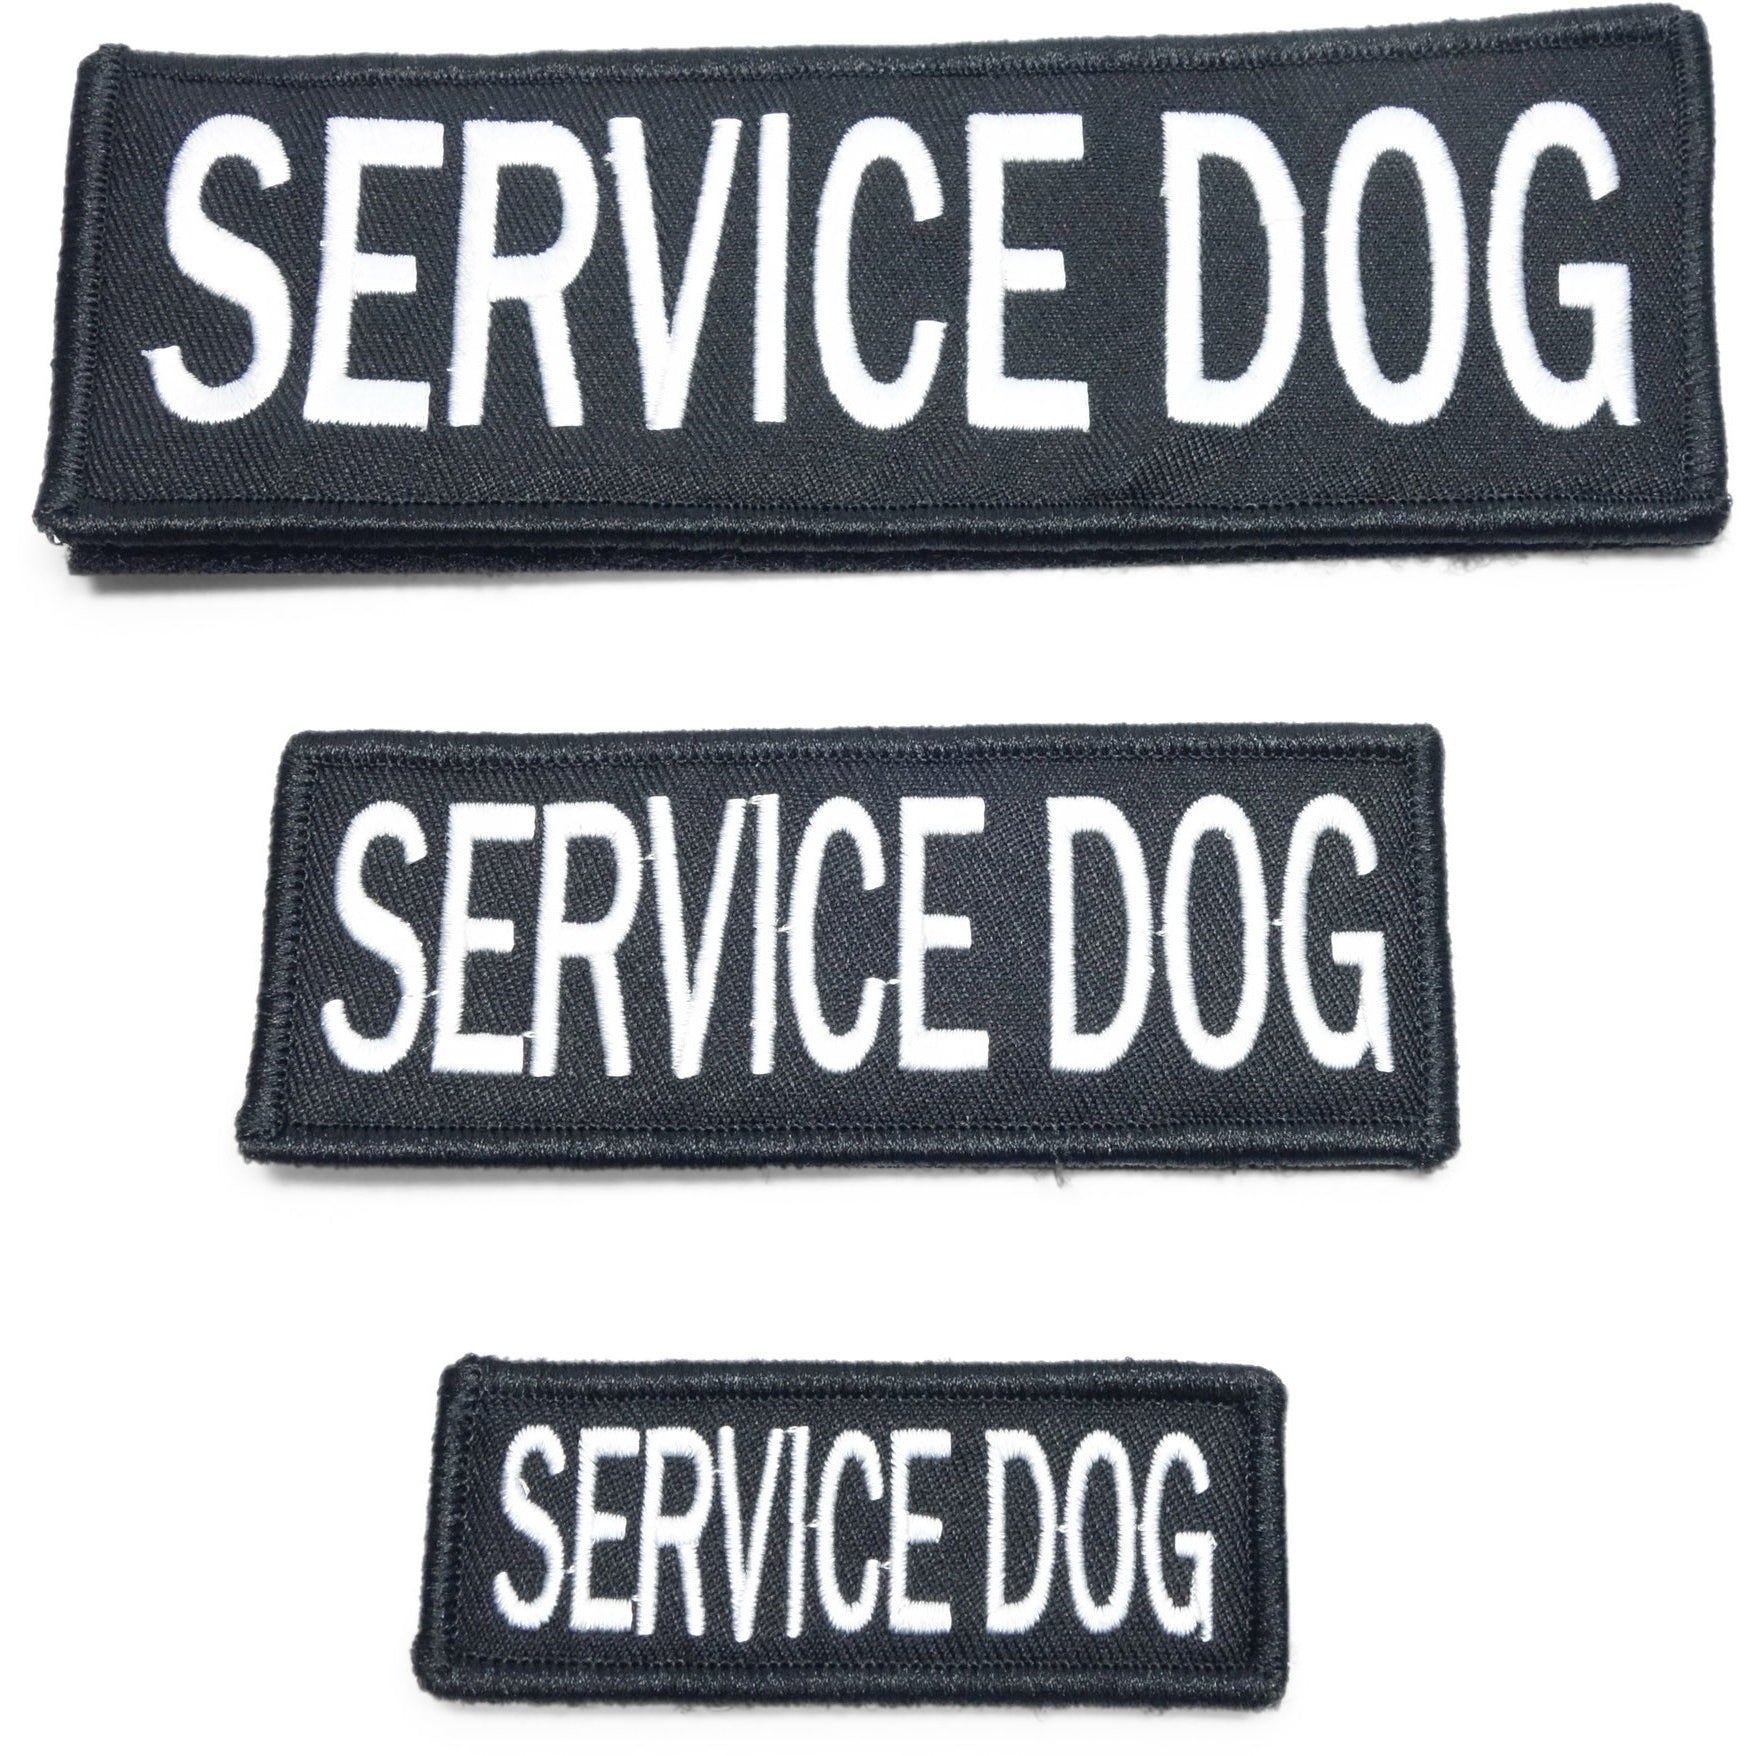 Leashboss Service Dog Vest Patches - Embroidered 2 Pack - Hook and Loop Both Sides - in Training / Emotional Support / Service